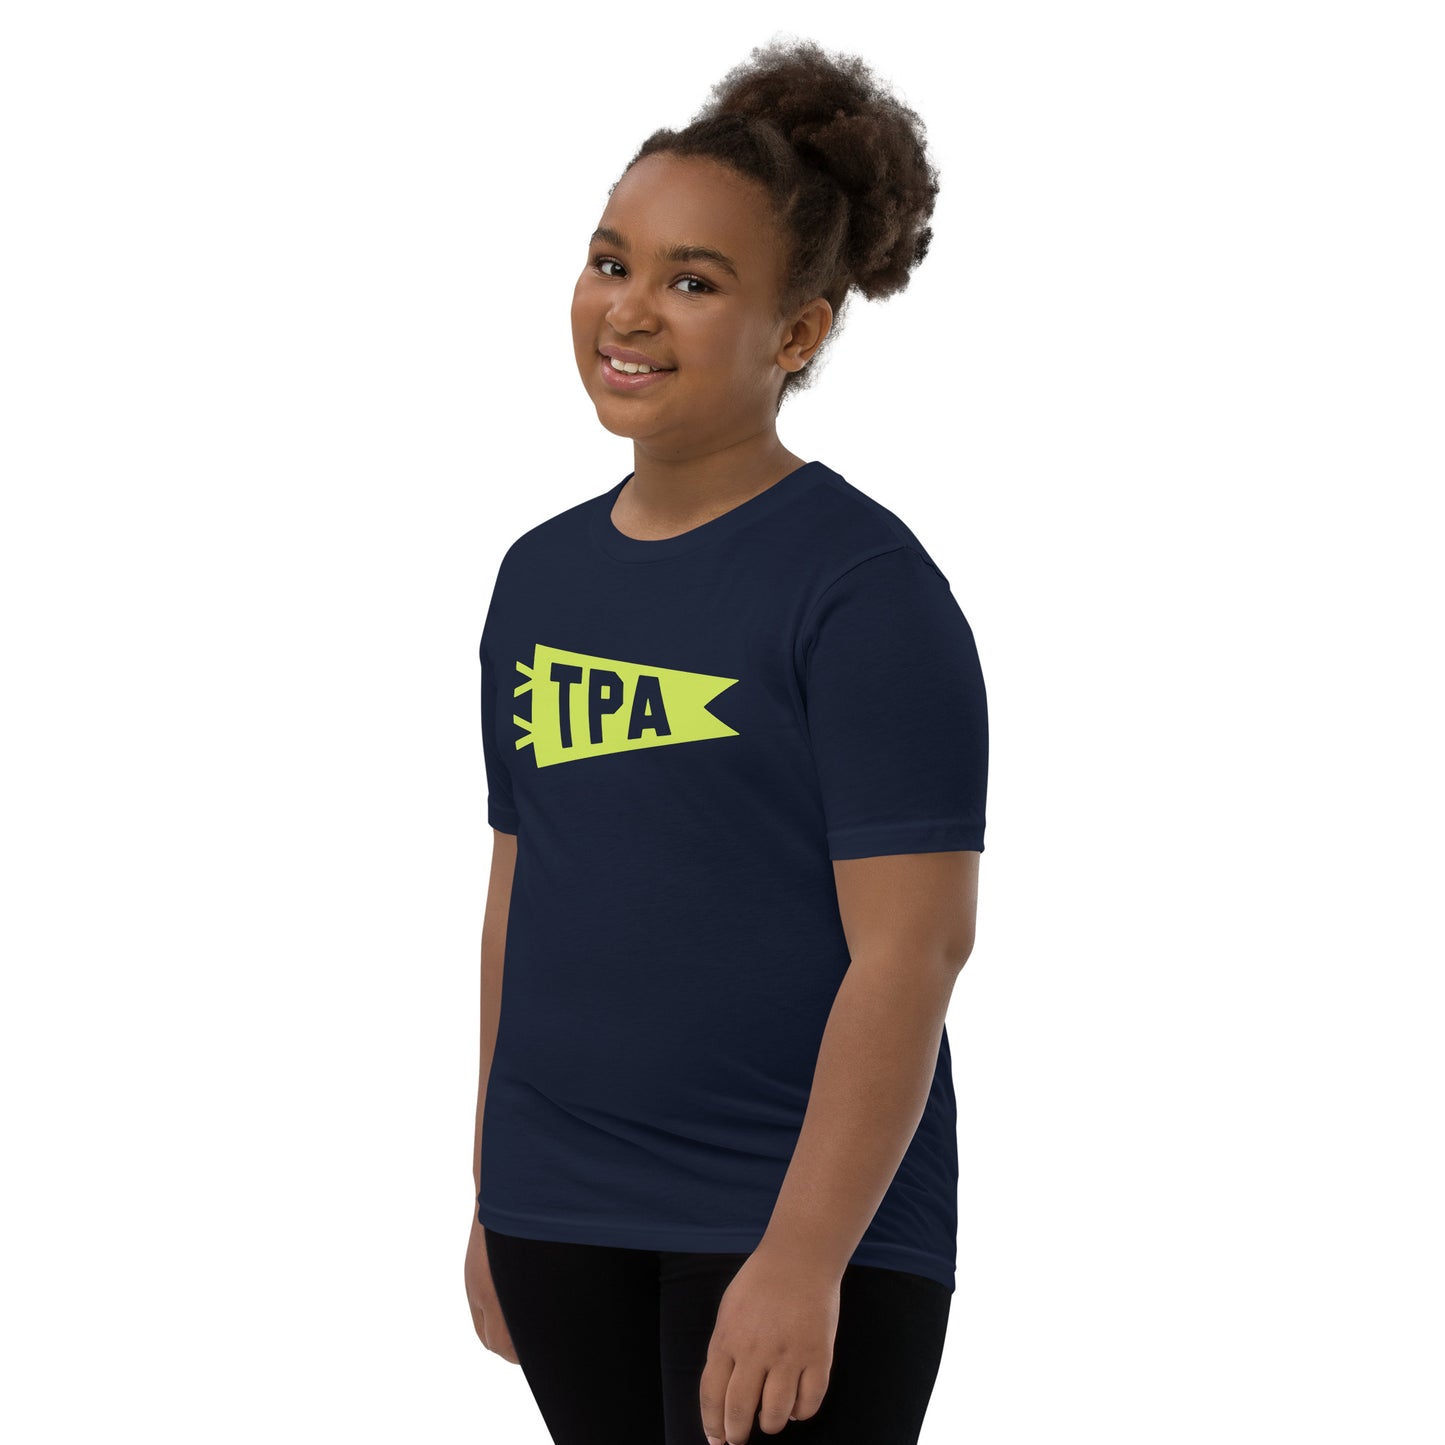 Kid's Airport Code Tee - Green Graphic • TPA Tampa • YHM Designs - Image 04